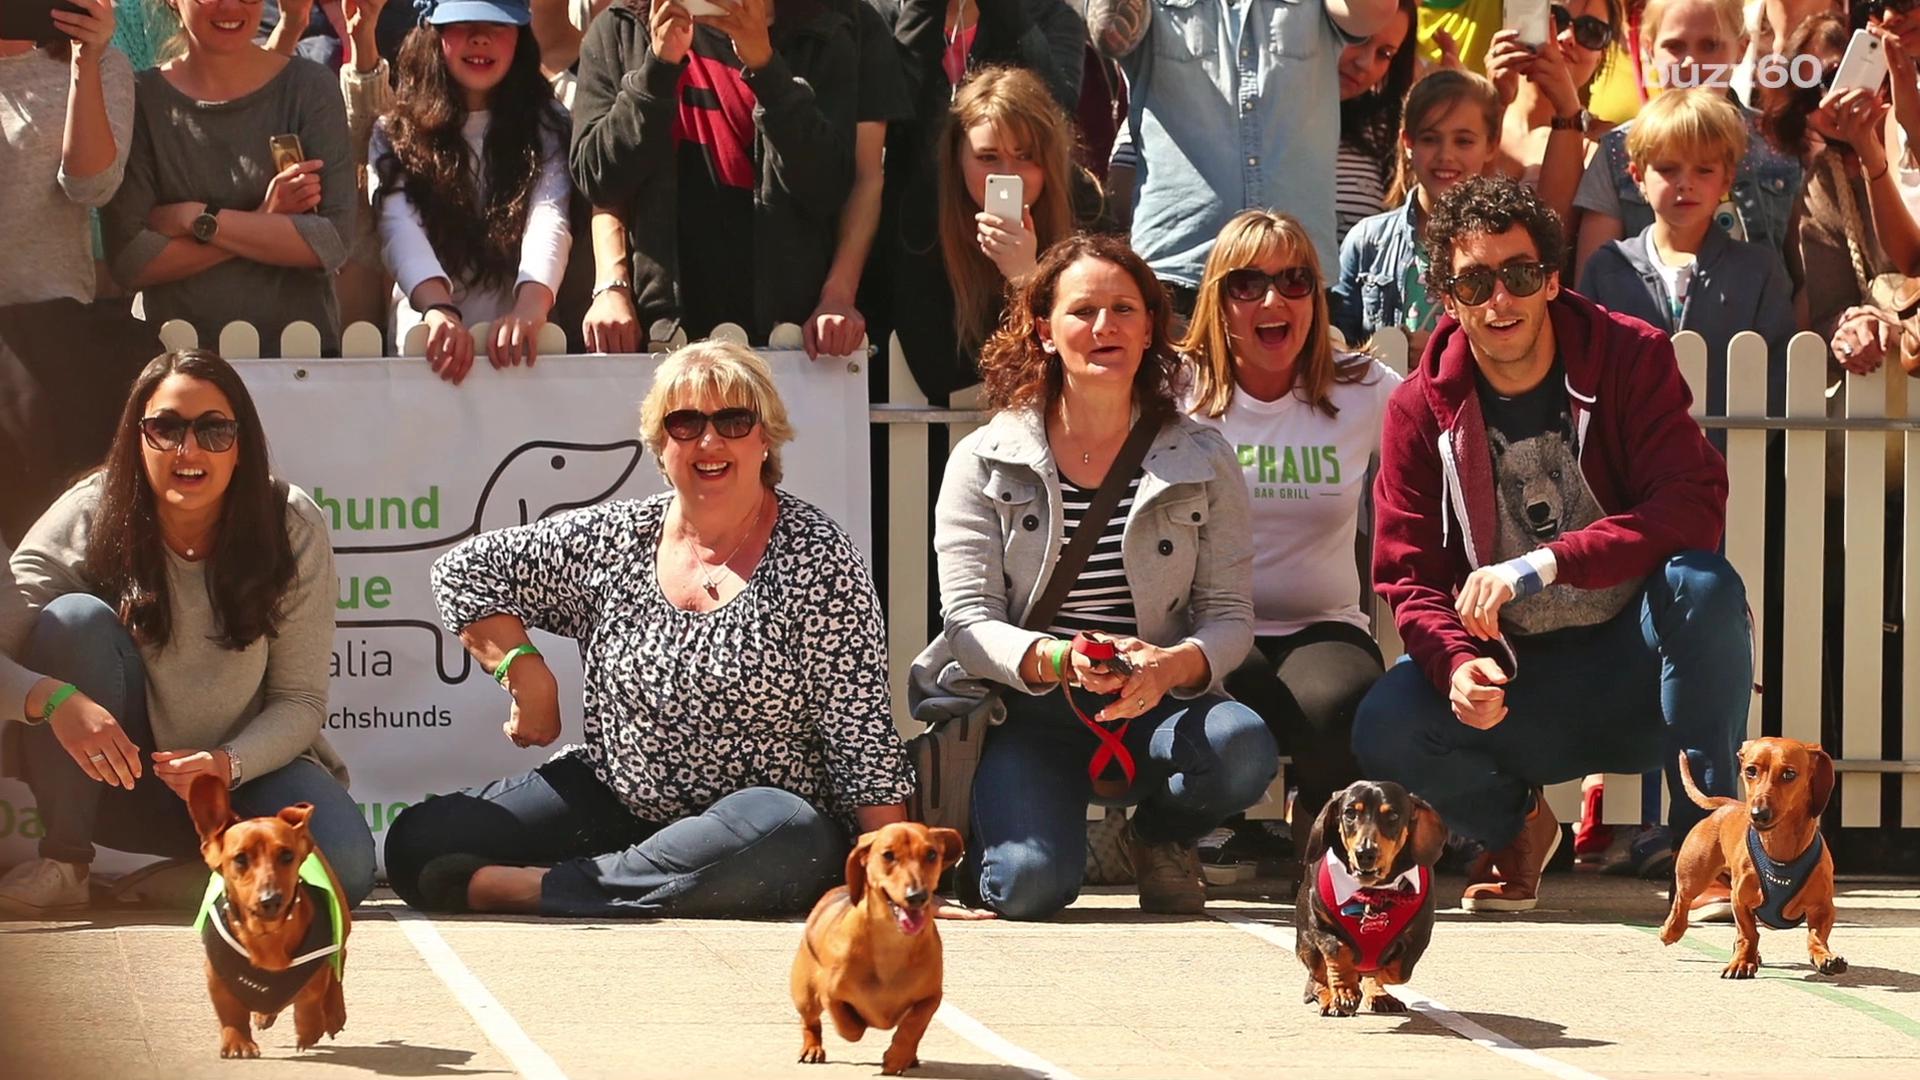 Watching these wiener dogs race will make your day